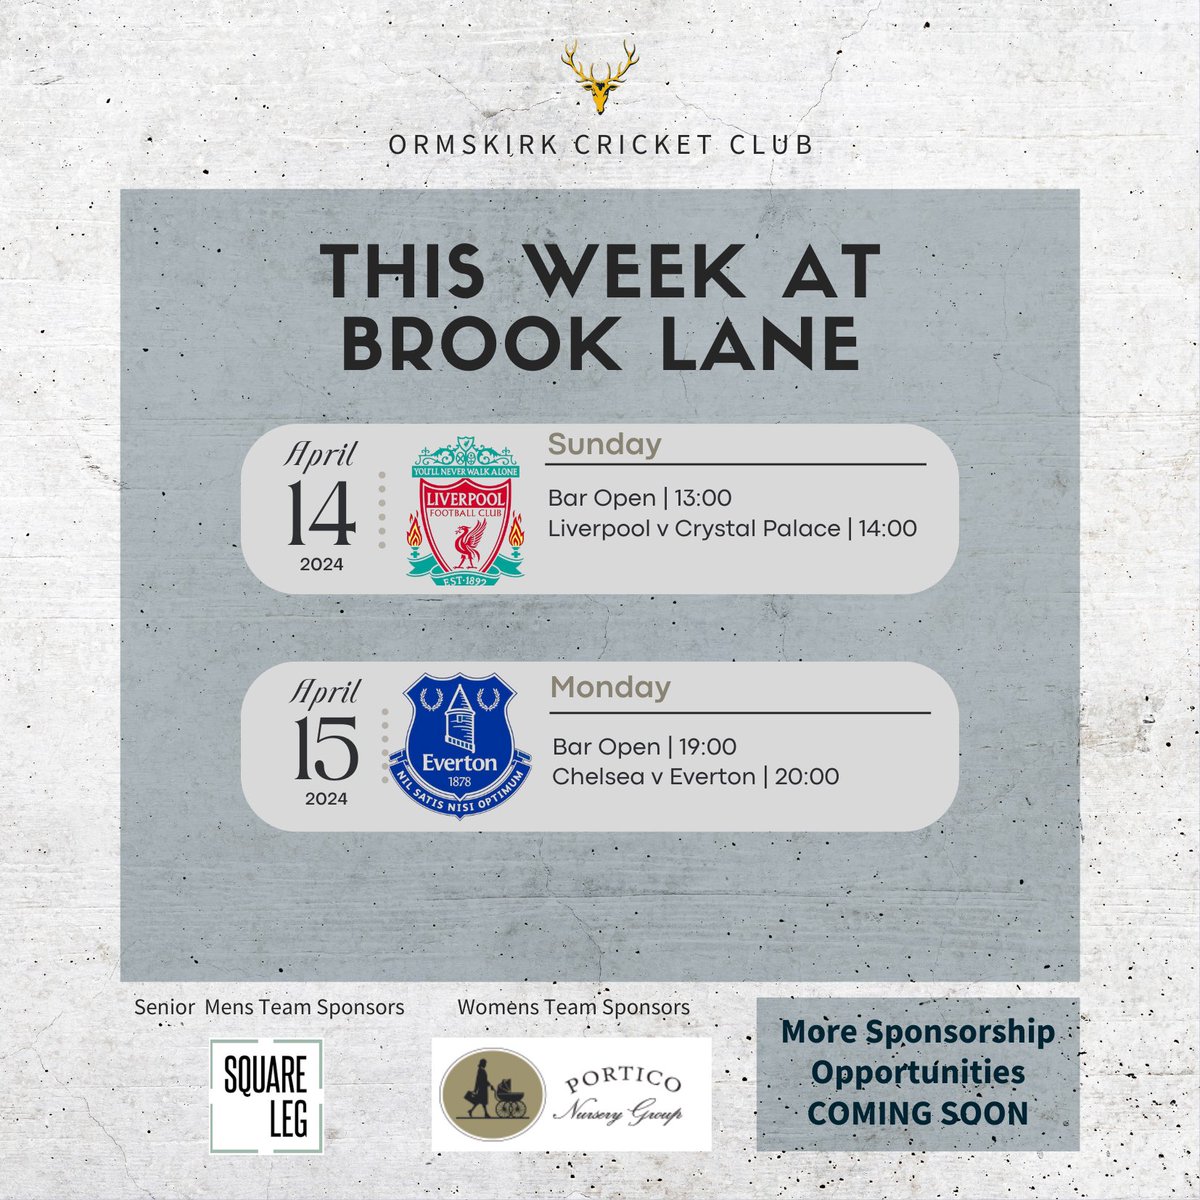 This week at Brook Lane! Hoping to welcome cricket back shortly 🤞☔️